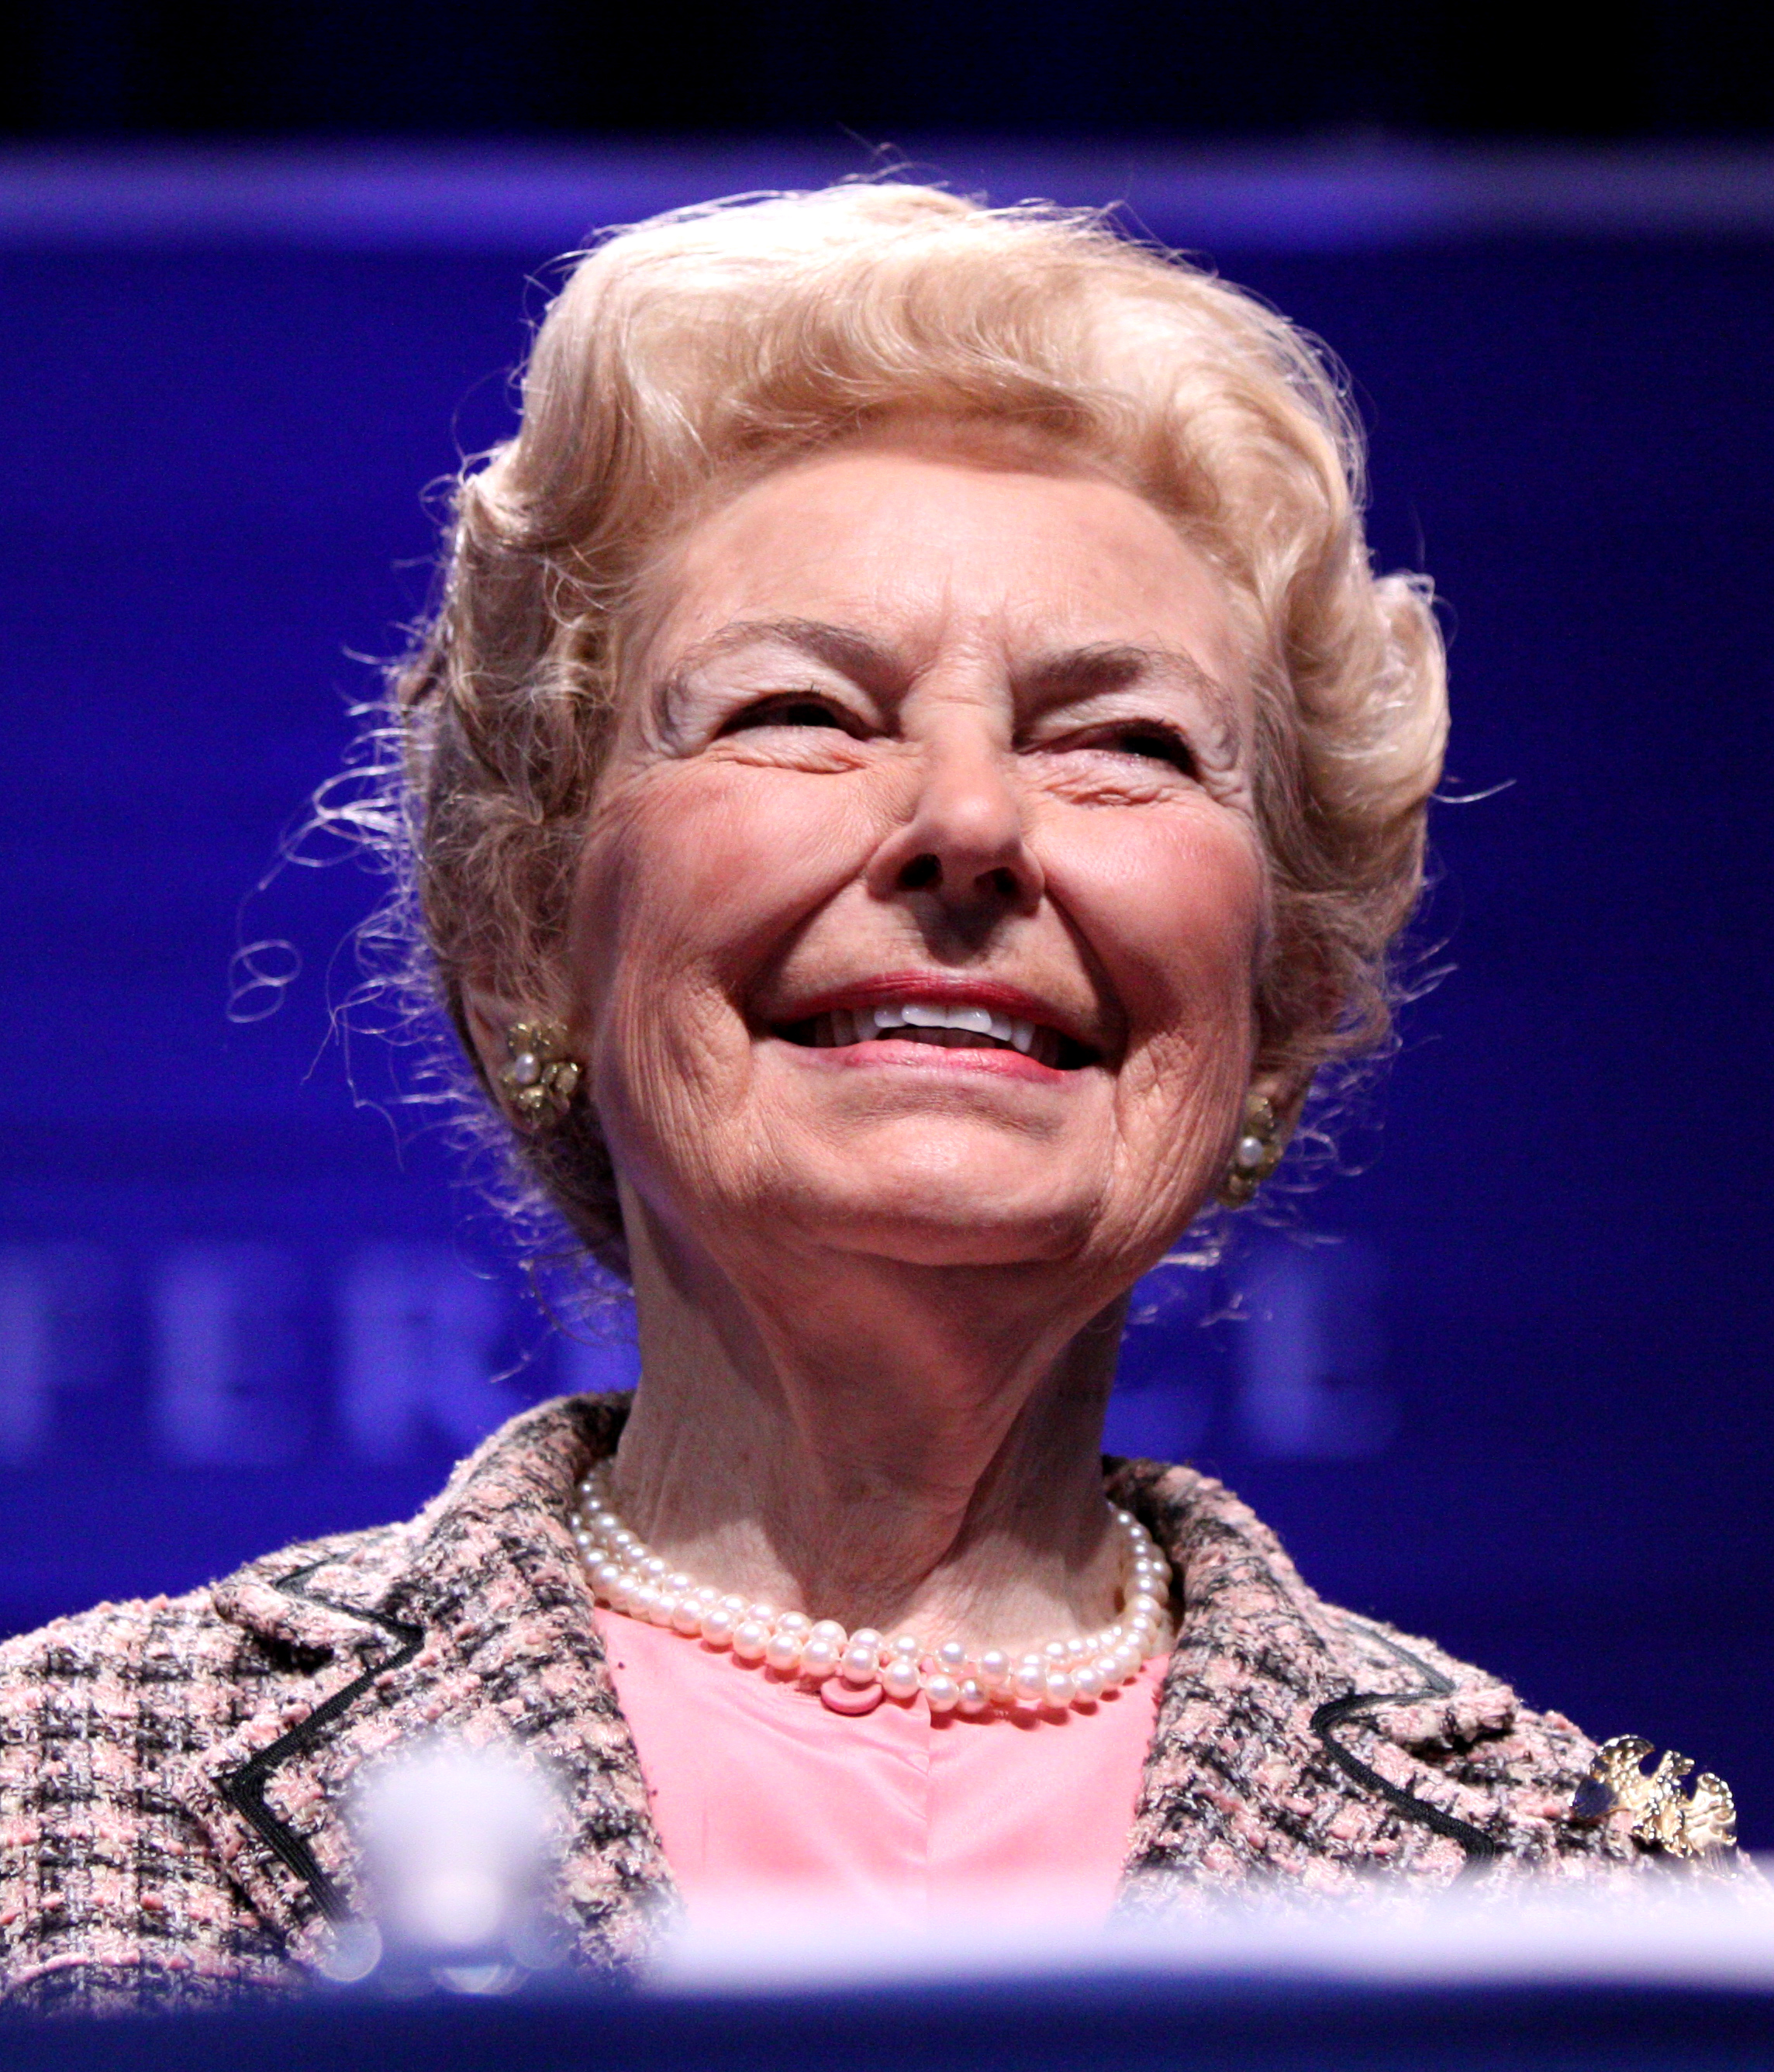 https://upload.wikimedia.org/wikipedia/commons/8/8b/Phyllis_Schlafly_by_Gage_Skidmore.jpg